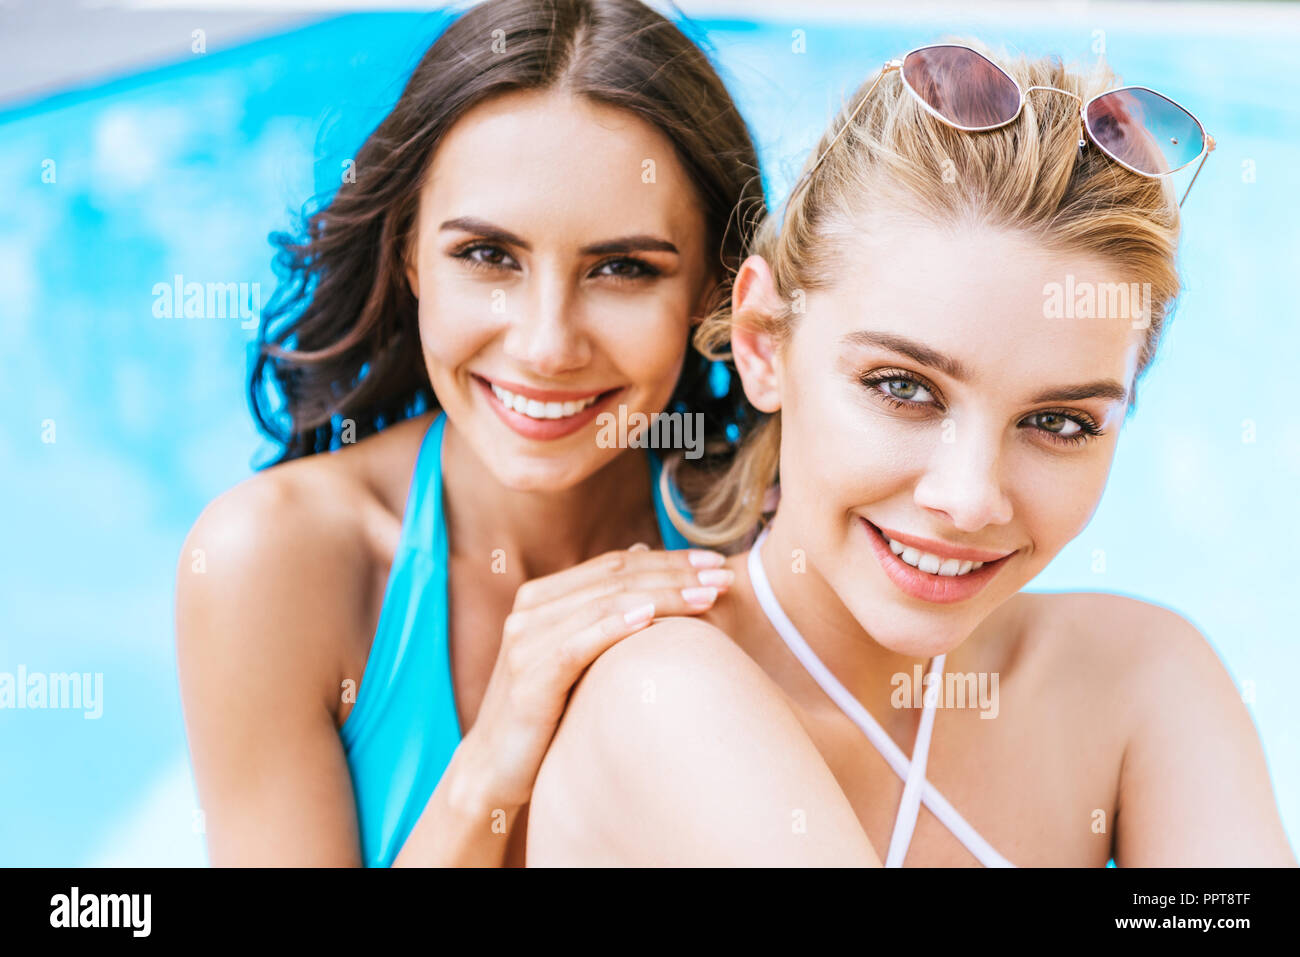 Belles copines young smiling at camera proche piscine Banque D'Images